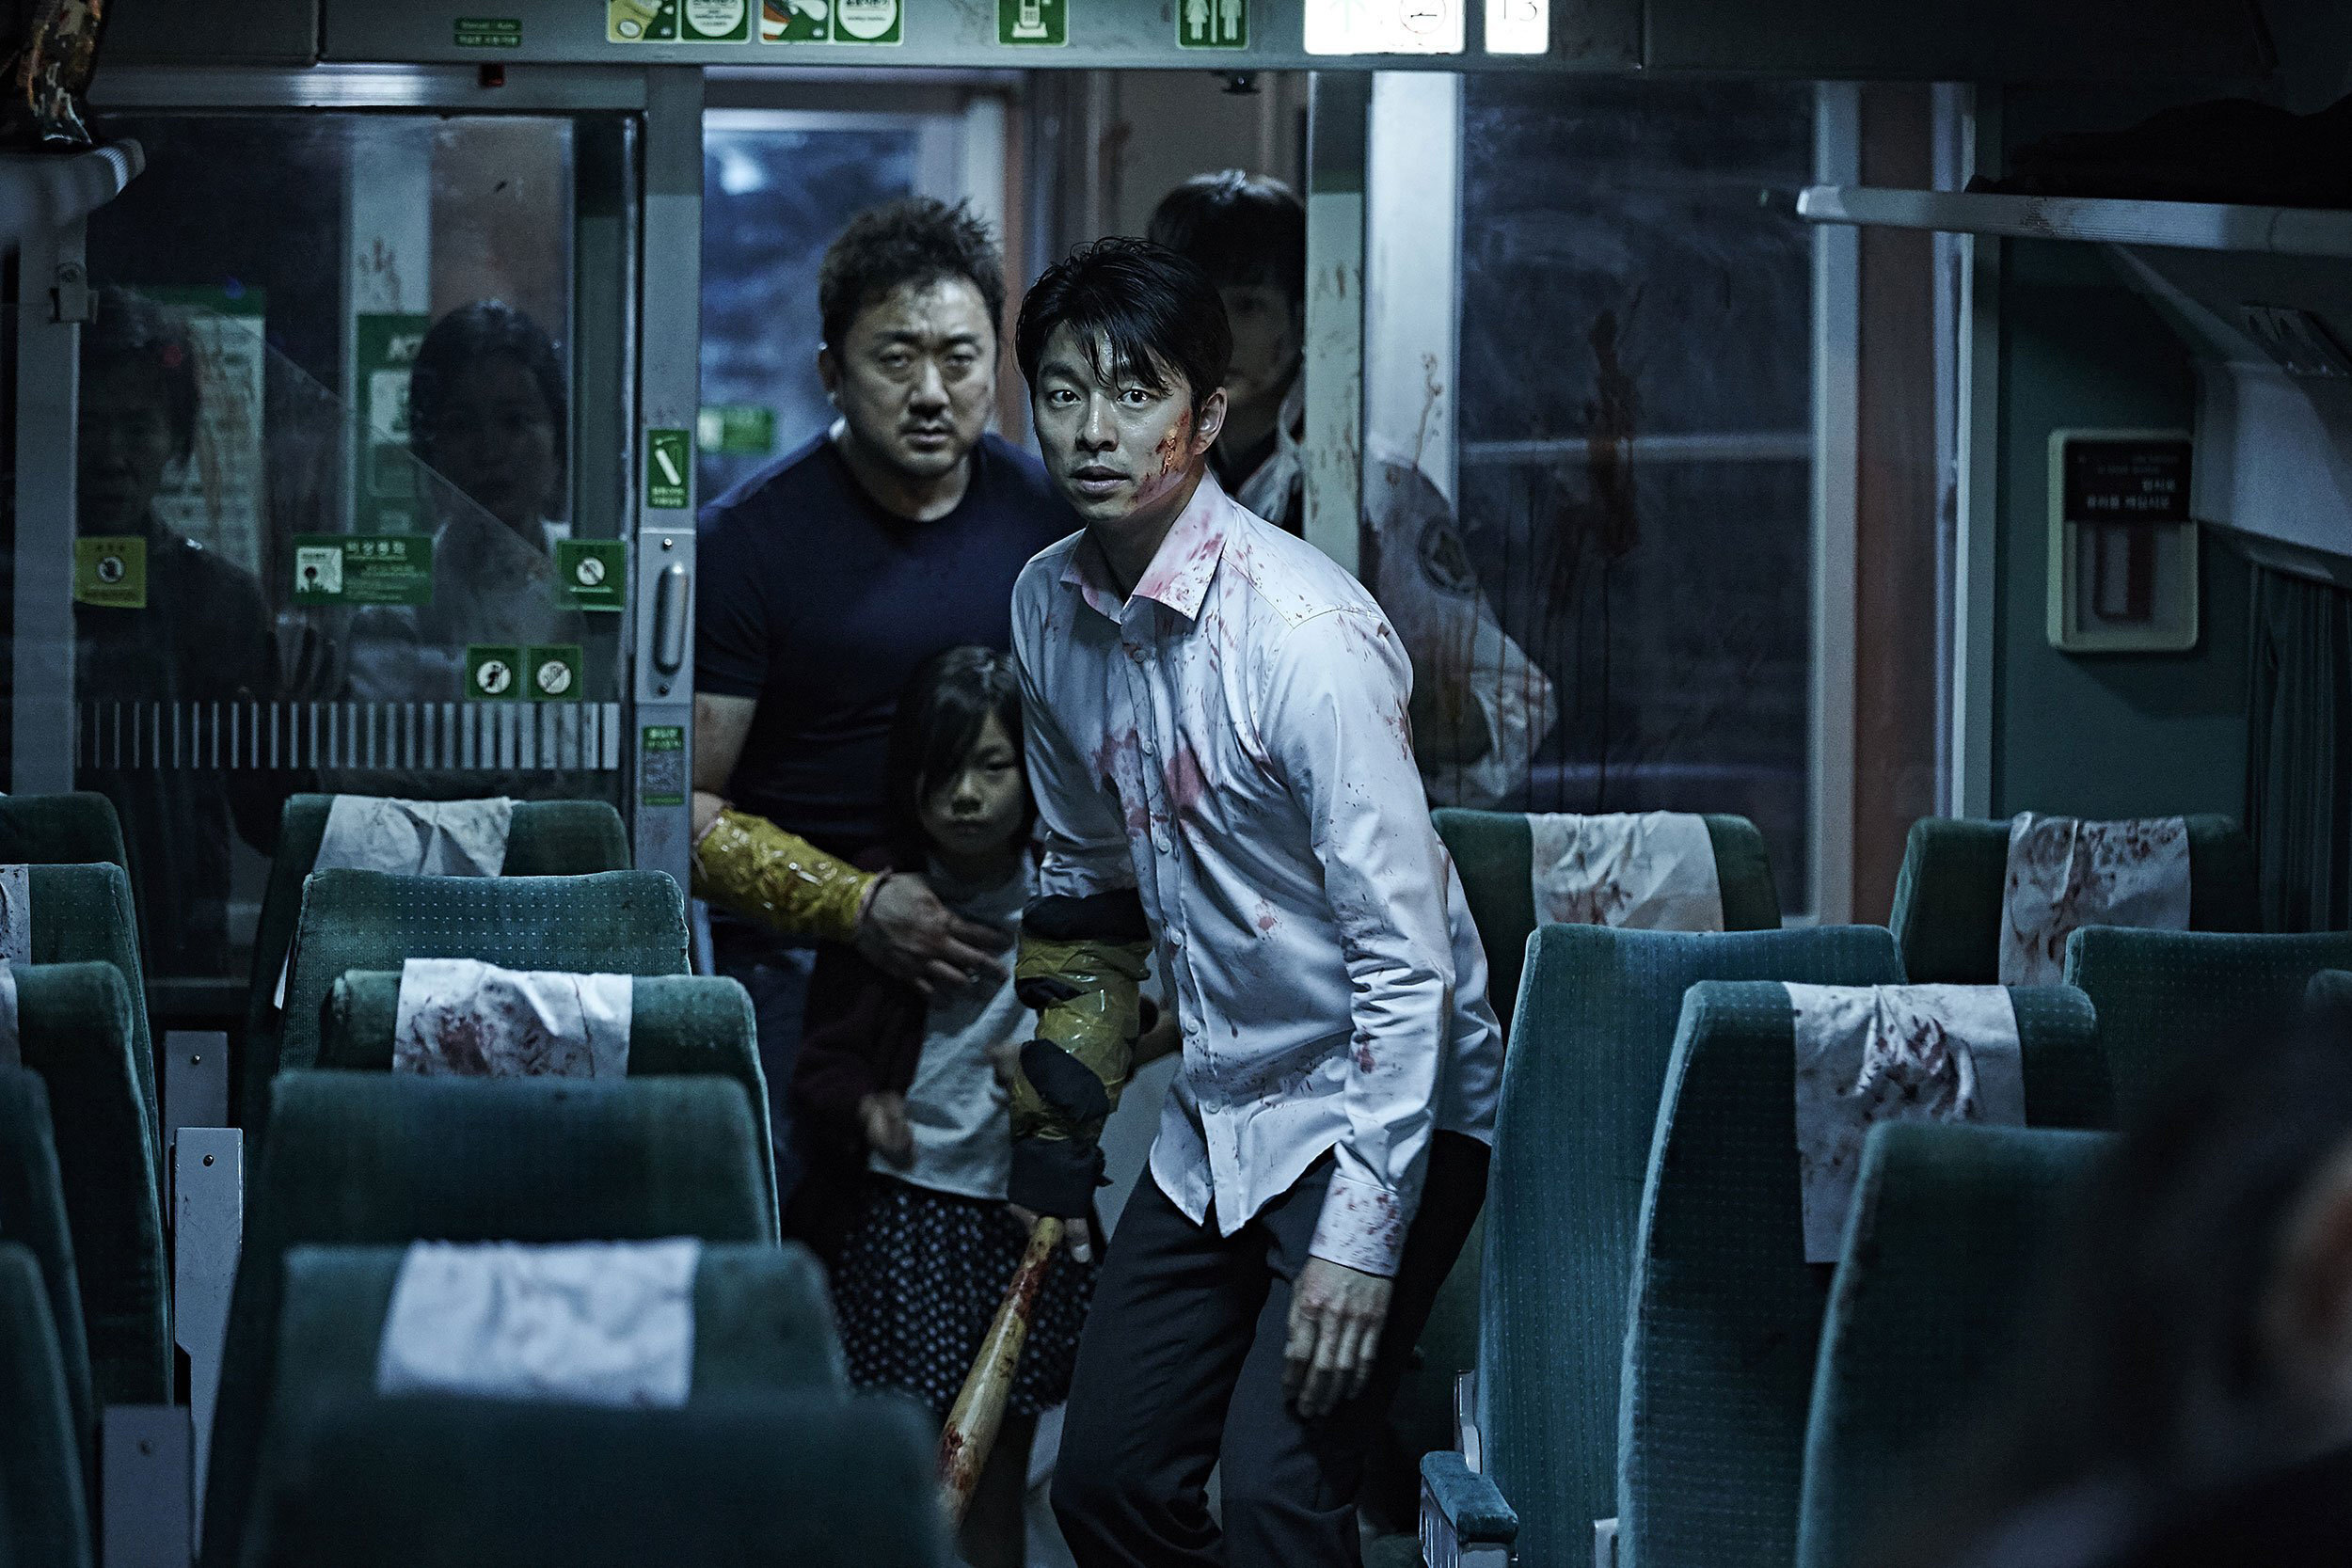 Gong Yoo (front) and Ma Dong-seok in a still from Train to Busan (2016).